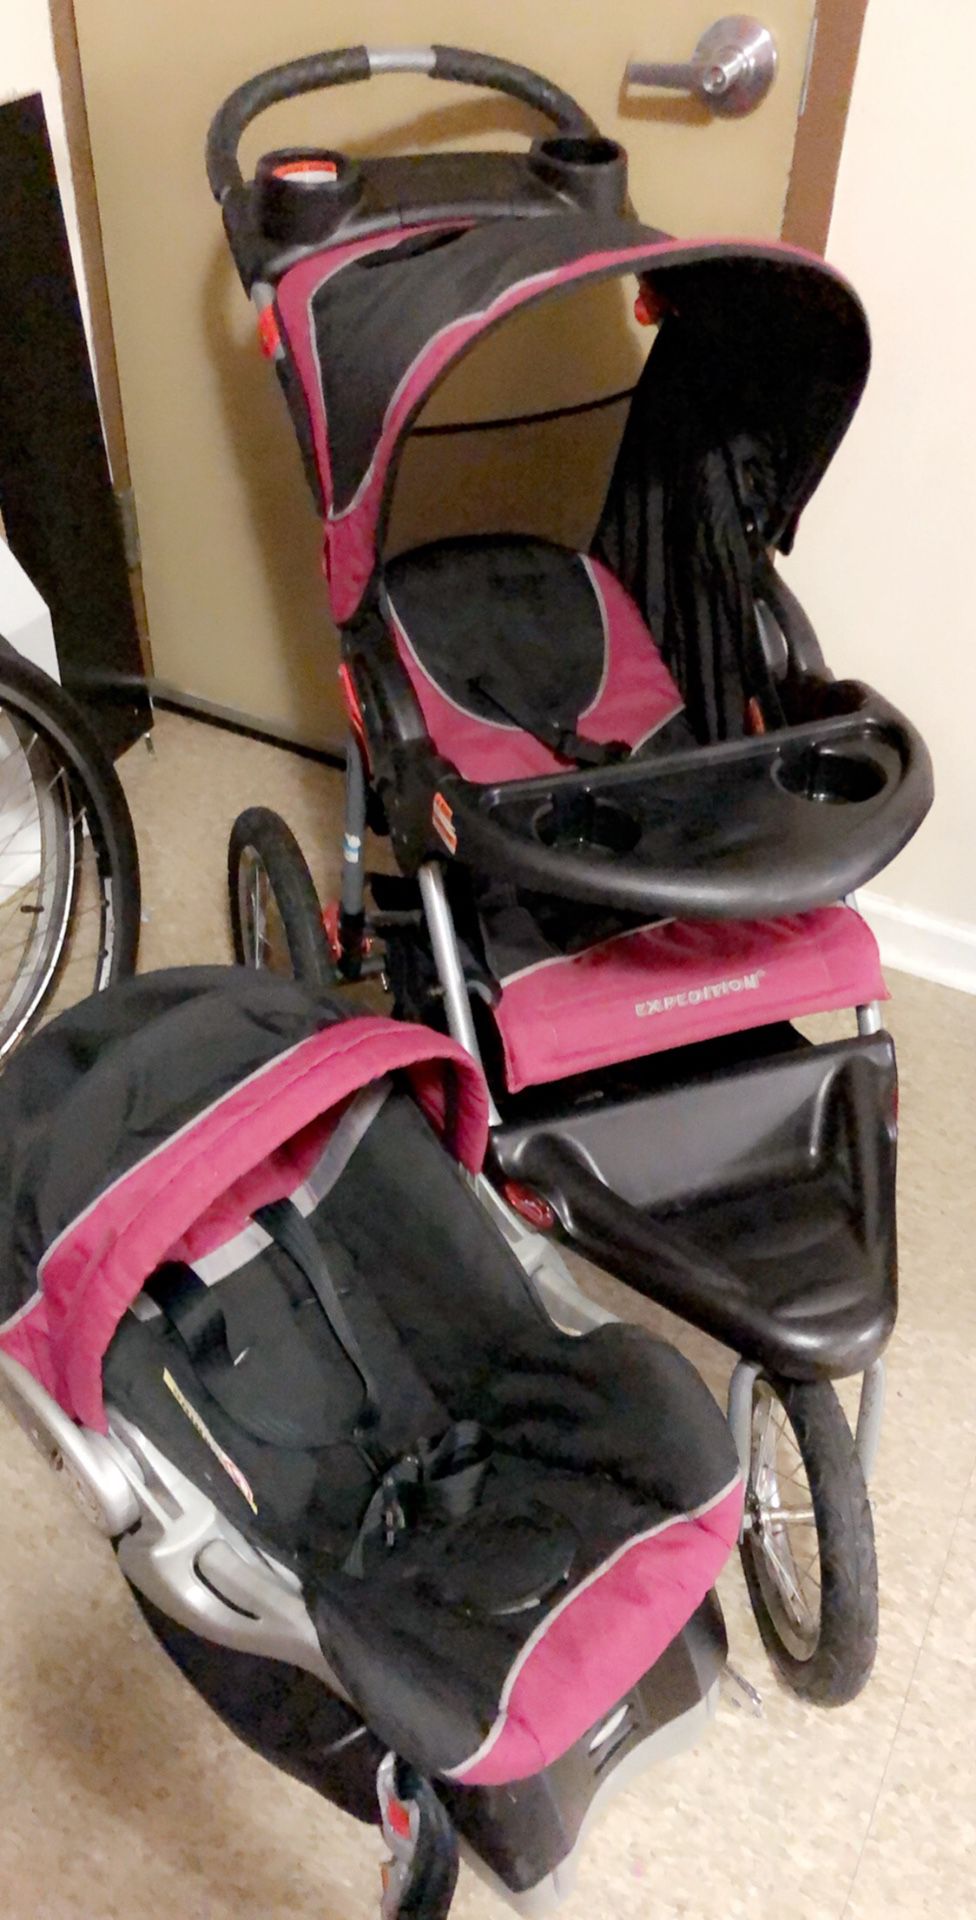 Expedition jogger travel system